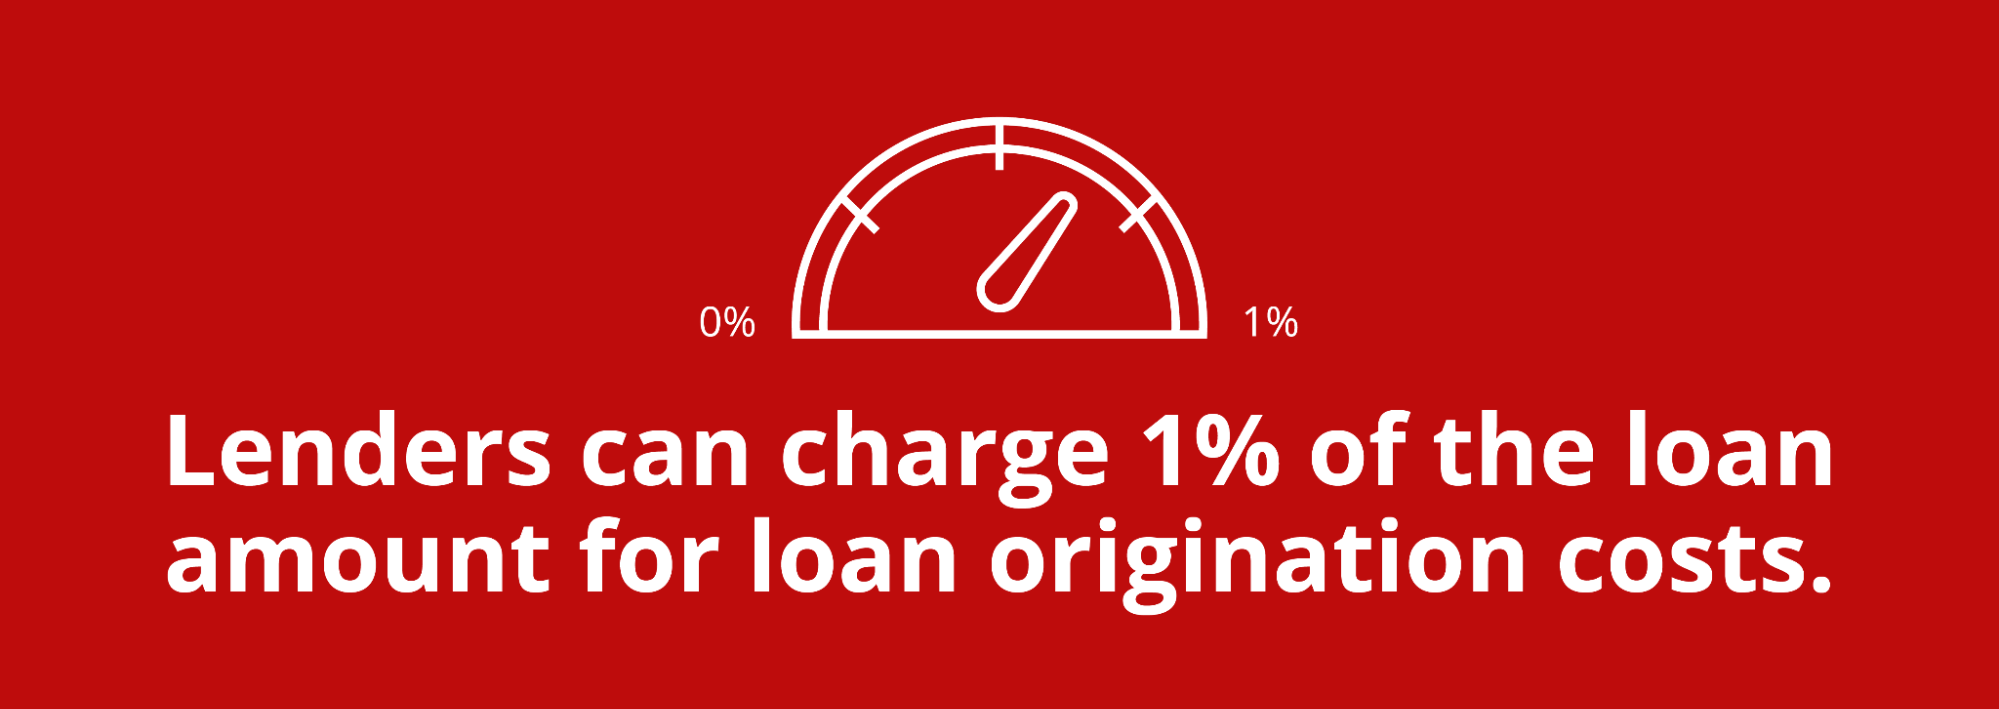 Graphic featuring a meter that ranges from 0% to 1% with text that reads, “Lenders can charge 1% of the loan amount for loan origination costs.”